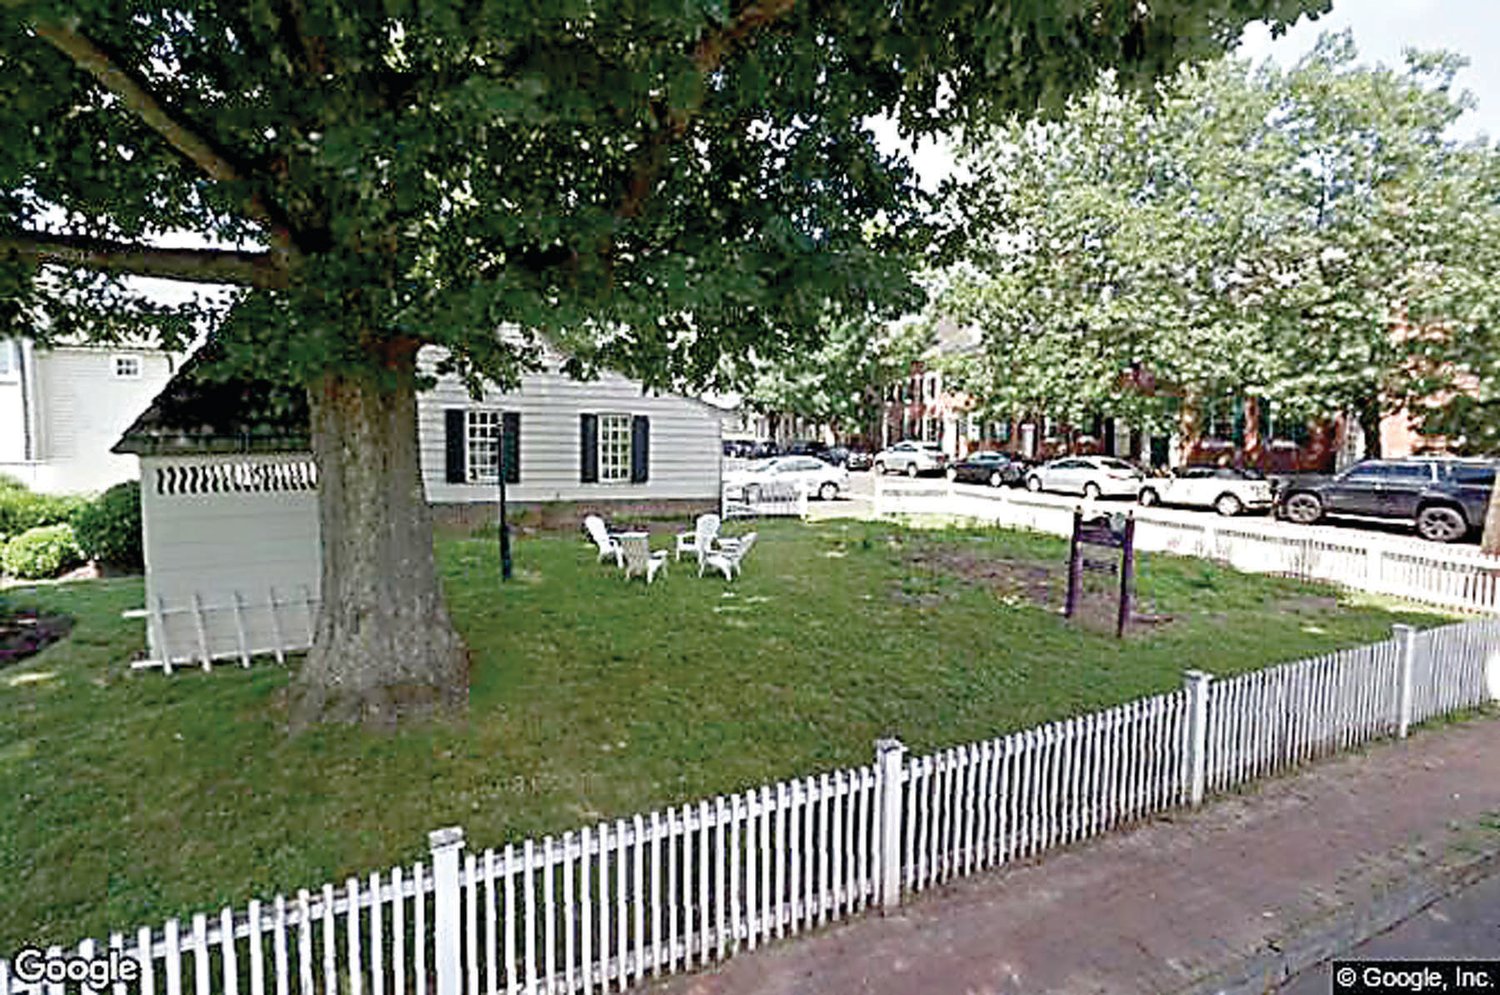 The side yard os one of the oldest Bucks County buildings is eyed for building by its owners.  Photograph by Steve Sherman